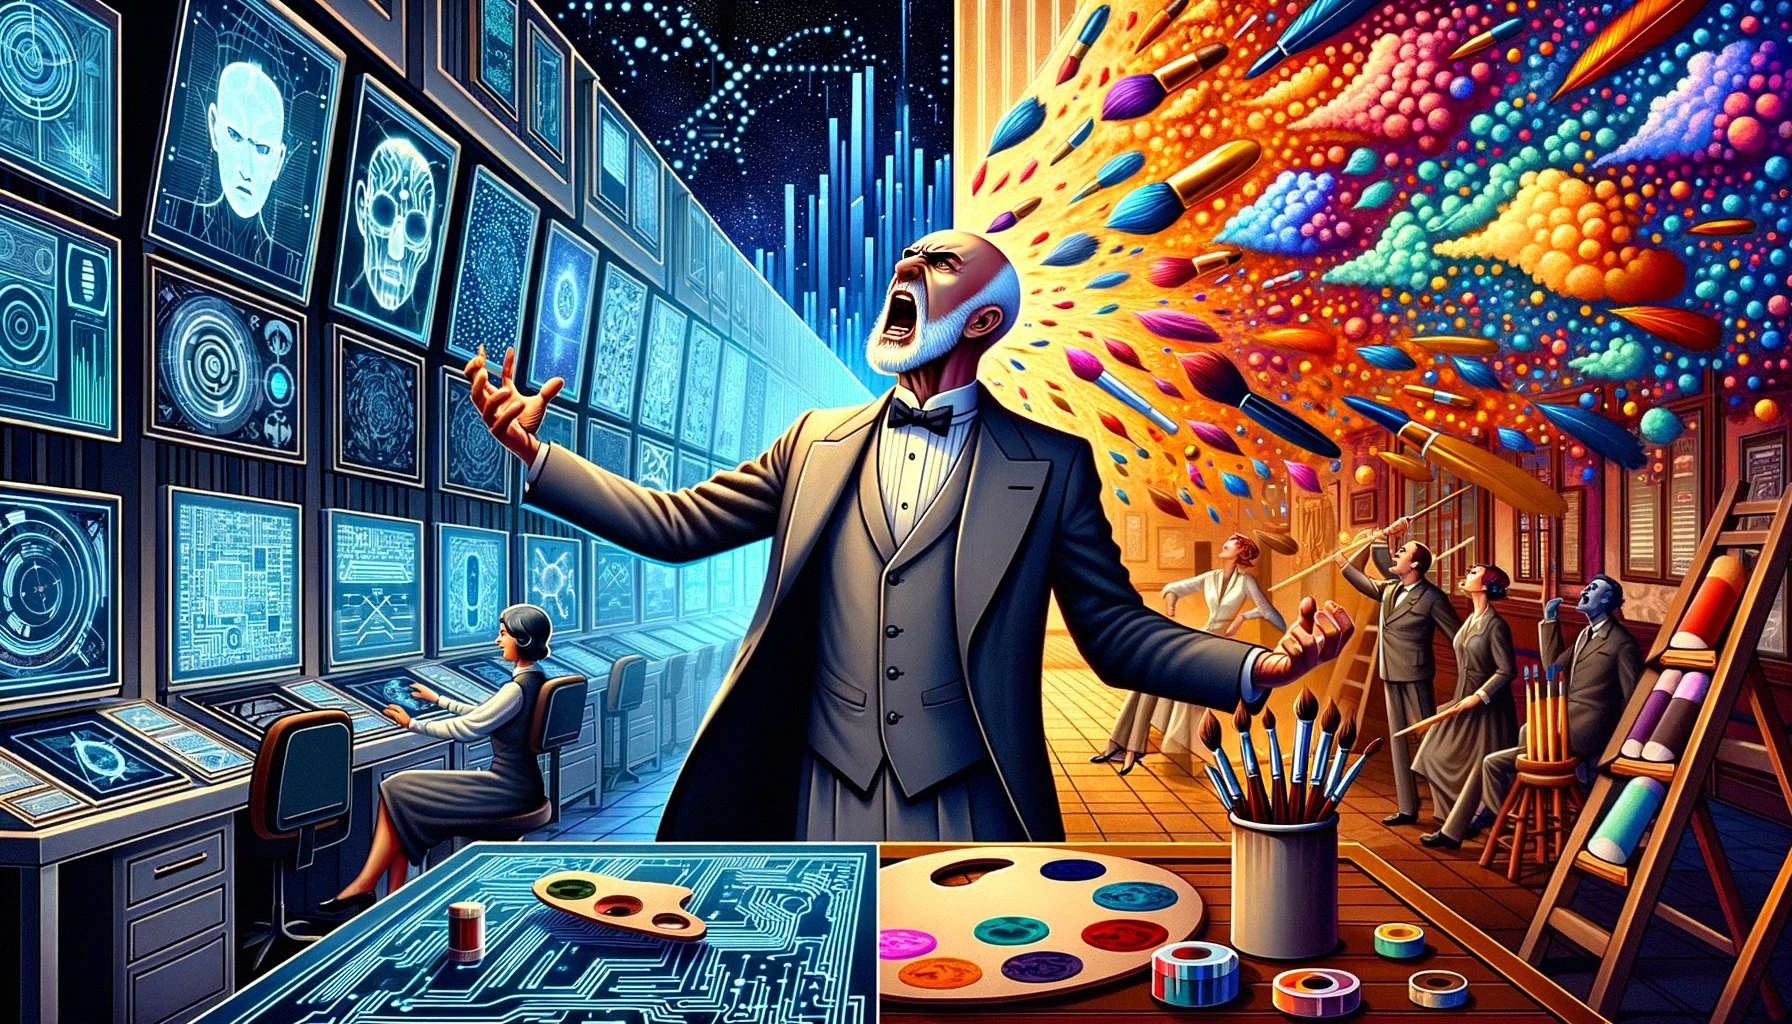 Illustration of a 1920s-themed office setting with guy frustrated between AI and Art